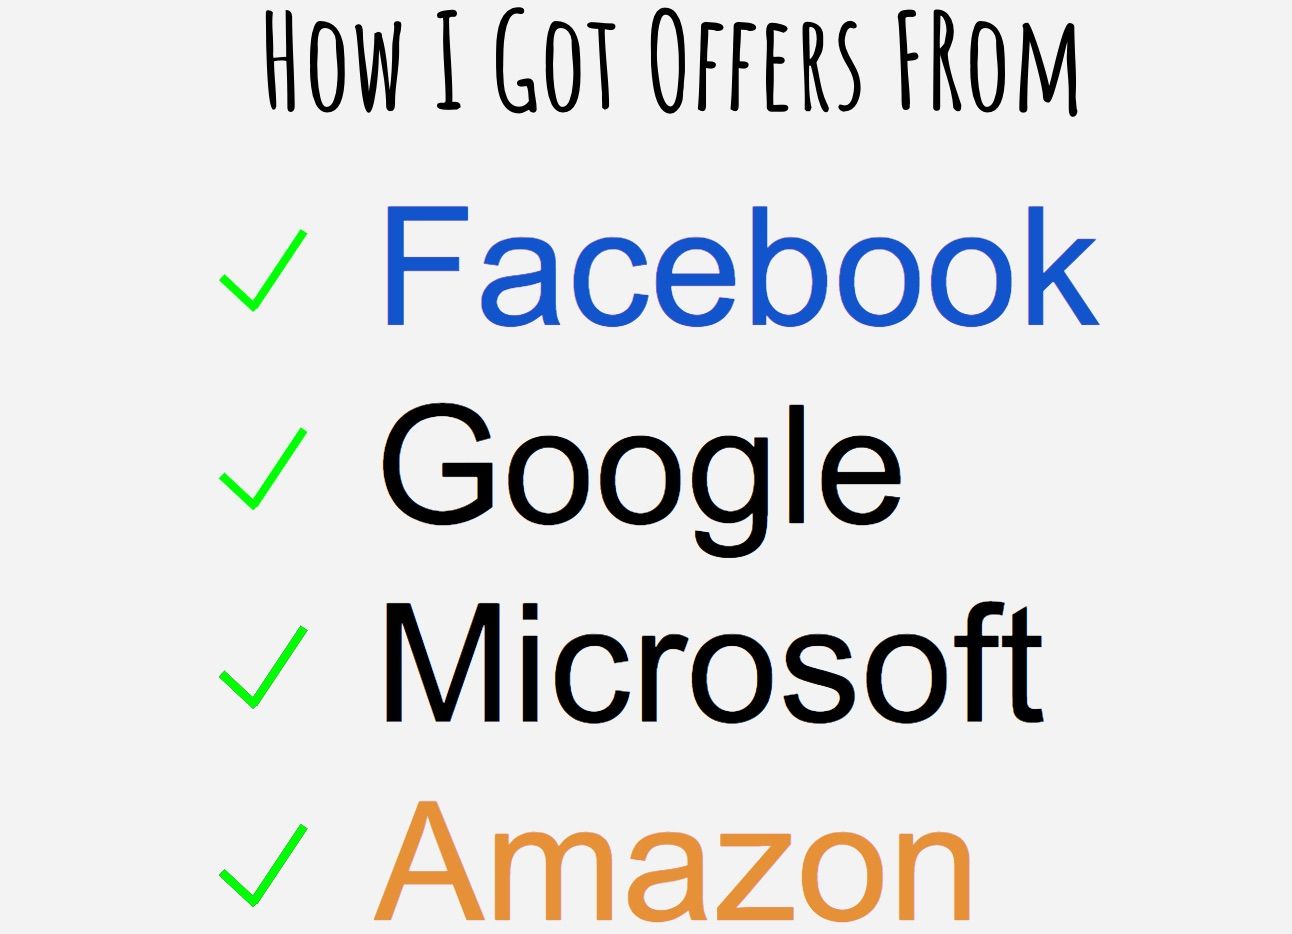 How I landed offers from Microsoft, Amazon, and Twitter without an Ivy League degree